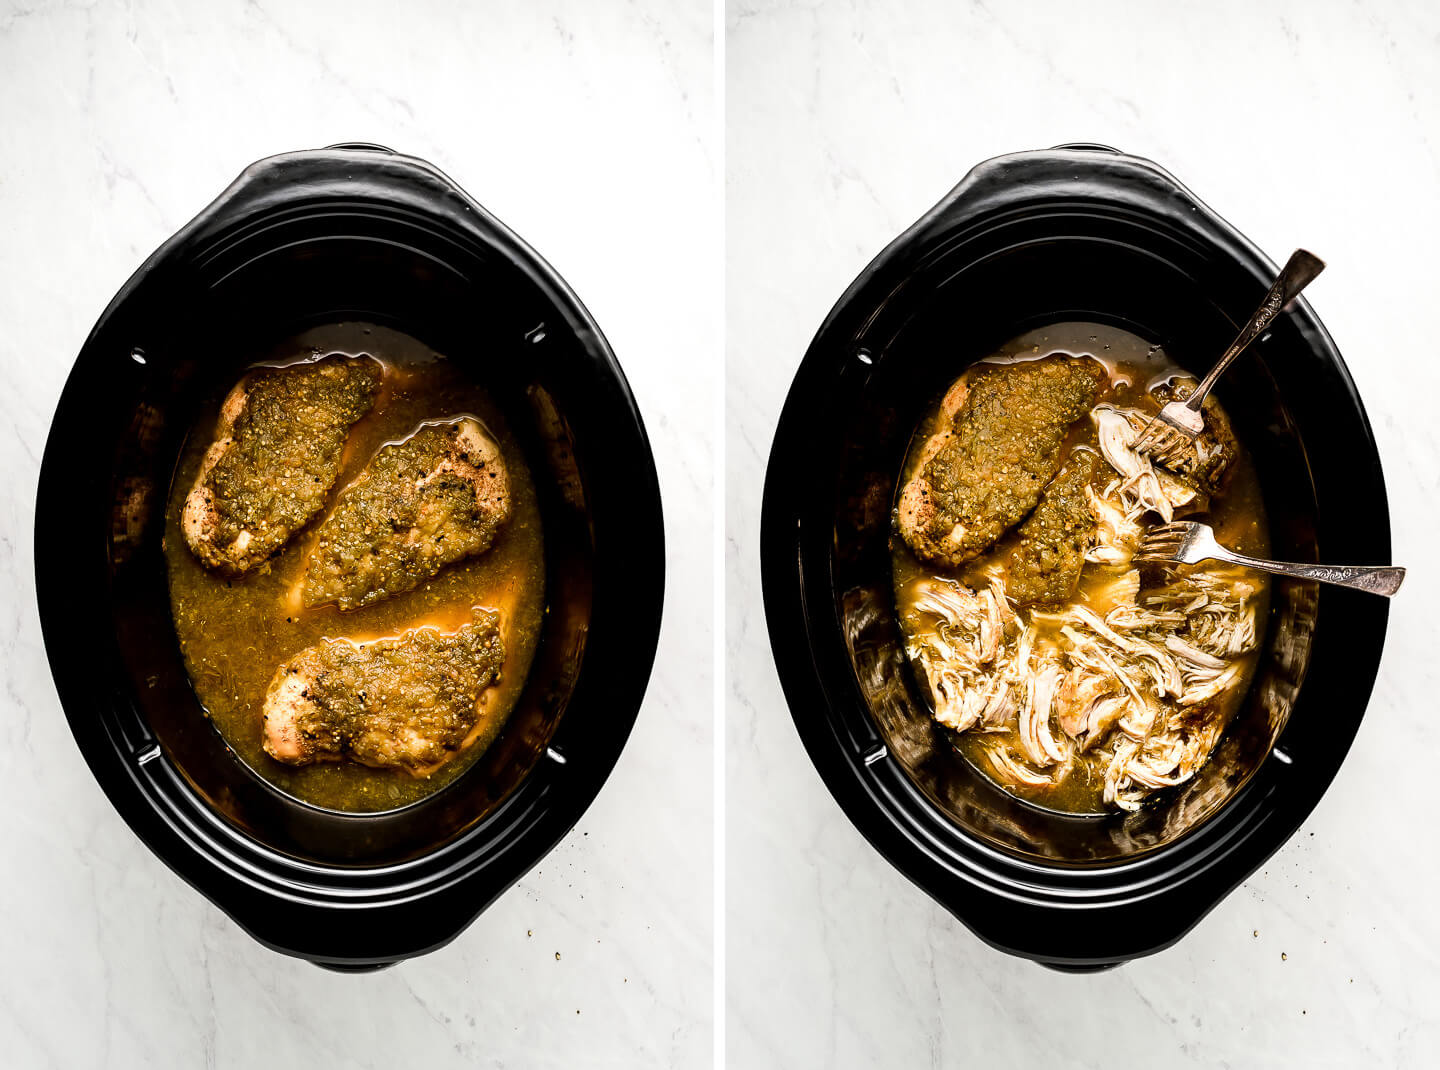 Diptych- A slow cooker with chicken breasts topped with salsa verde; shredding some of the chicken with 2 forks.